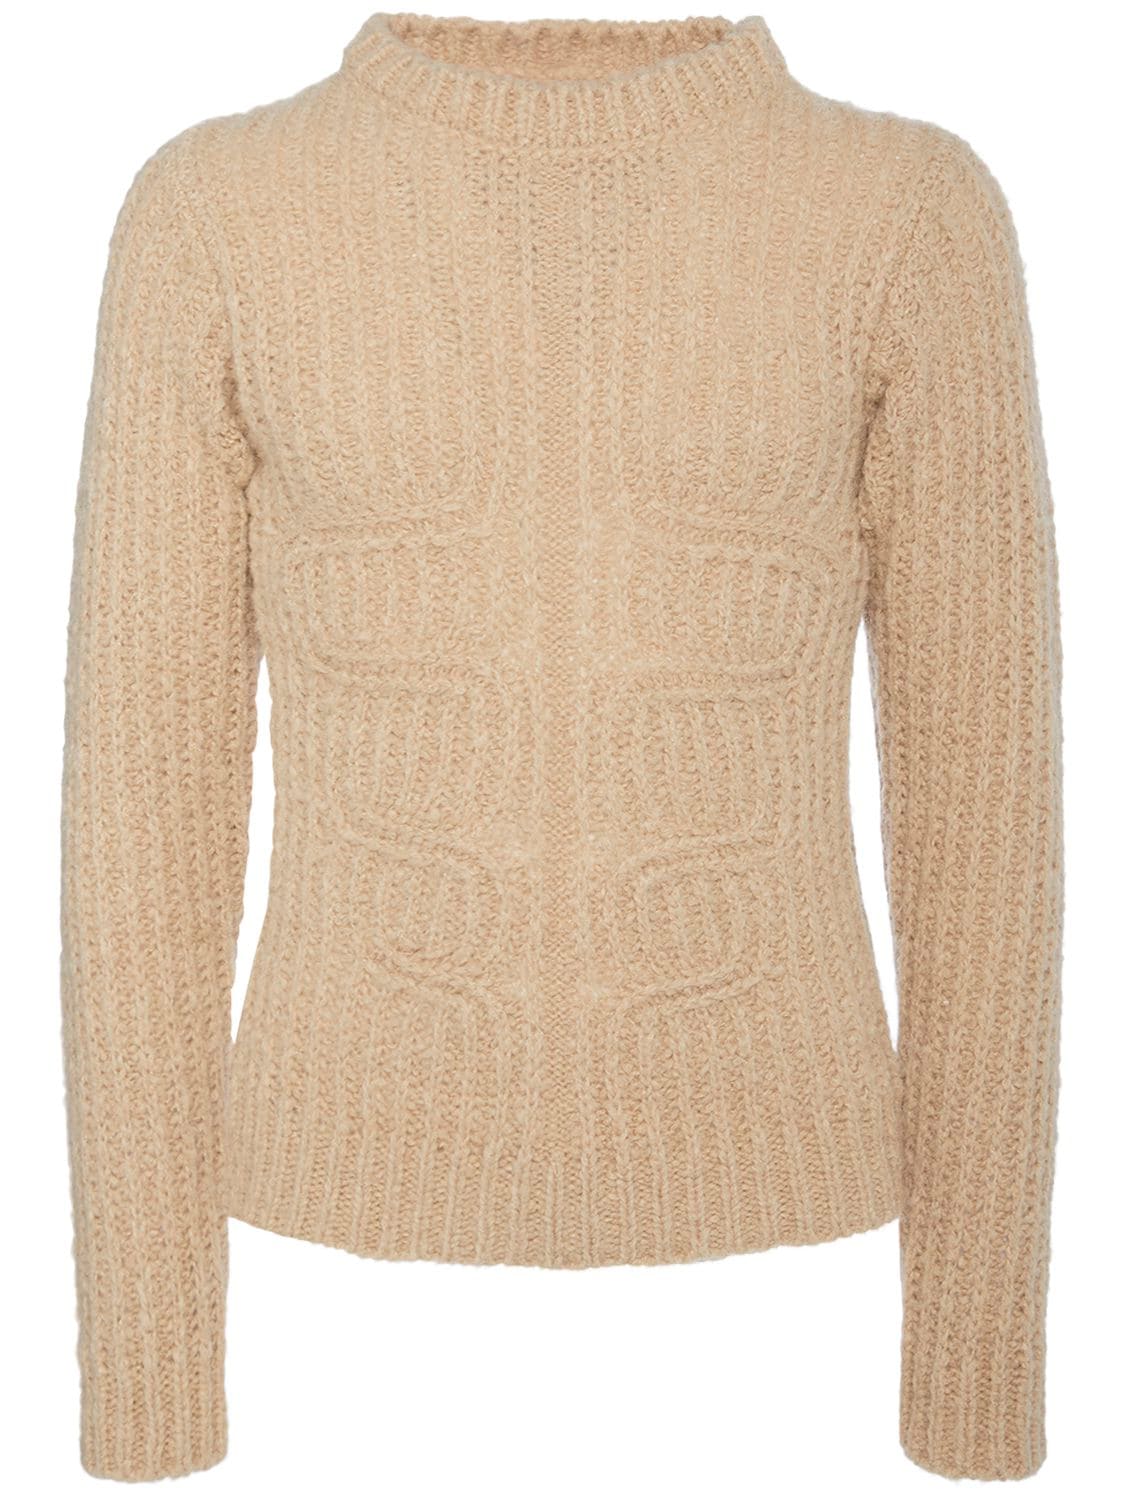 Image of Ribbed Wool Blend Sweater